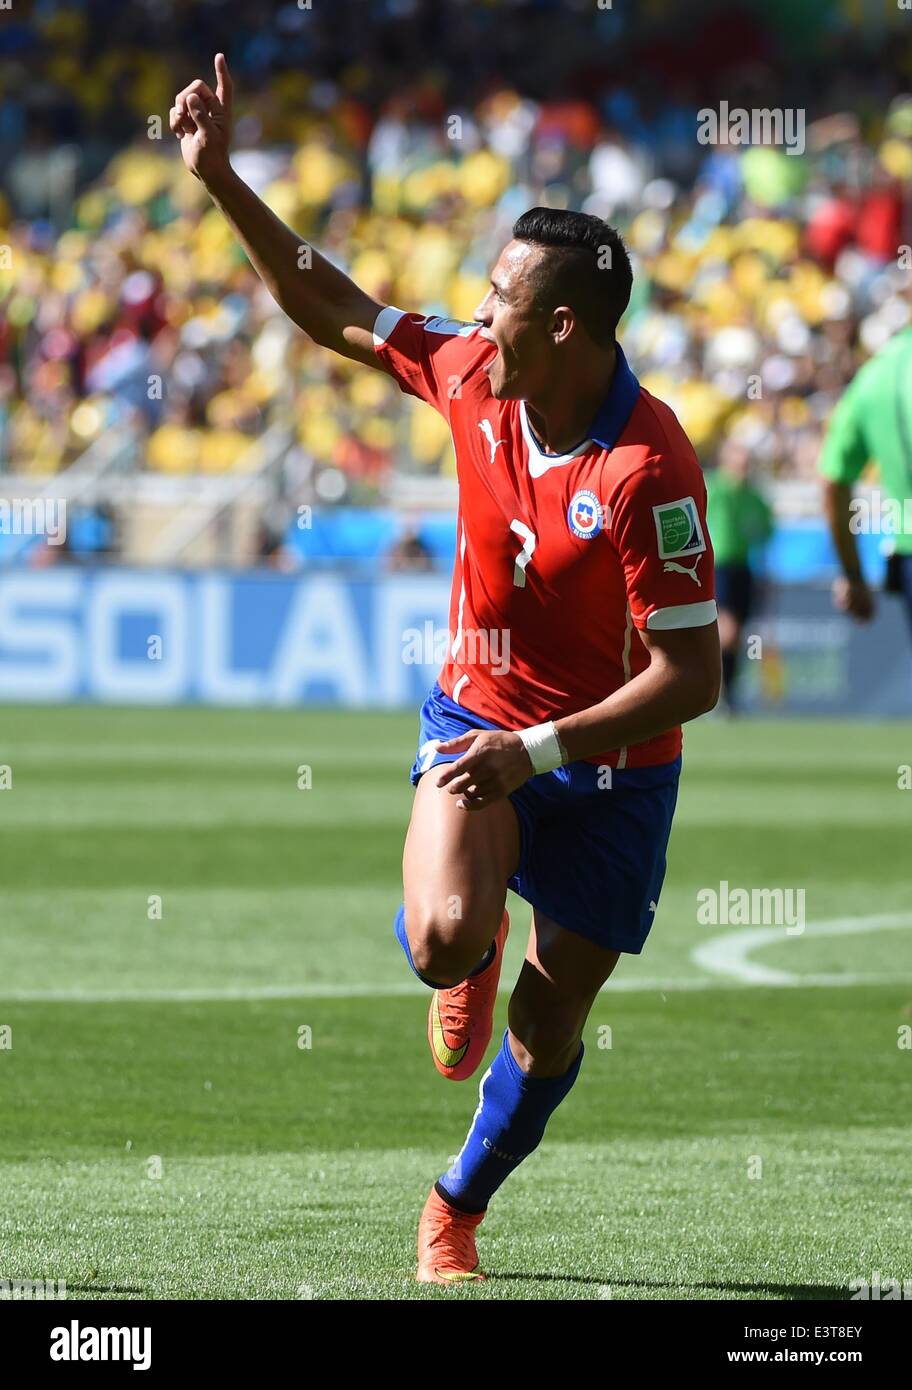 Belo Horizonte, Brazil. 28th June, 2014. Chile's Alexis Sanchez celebrates the goal during a Round of 16 match between Brazil and Chile of 2014 FIFA World Cup at the Estadio Mineirao Stadium in Belo Horizonte, Brazil, on June 28, 2014. Credit:  Liu Dawei/Xinhua/Alamy Live News Stock Photo